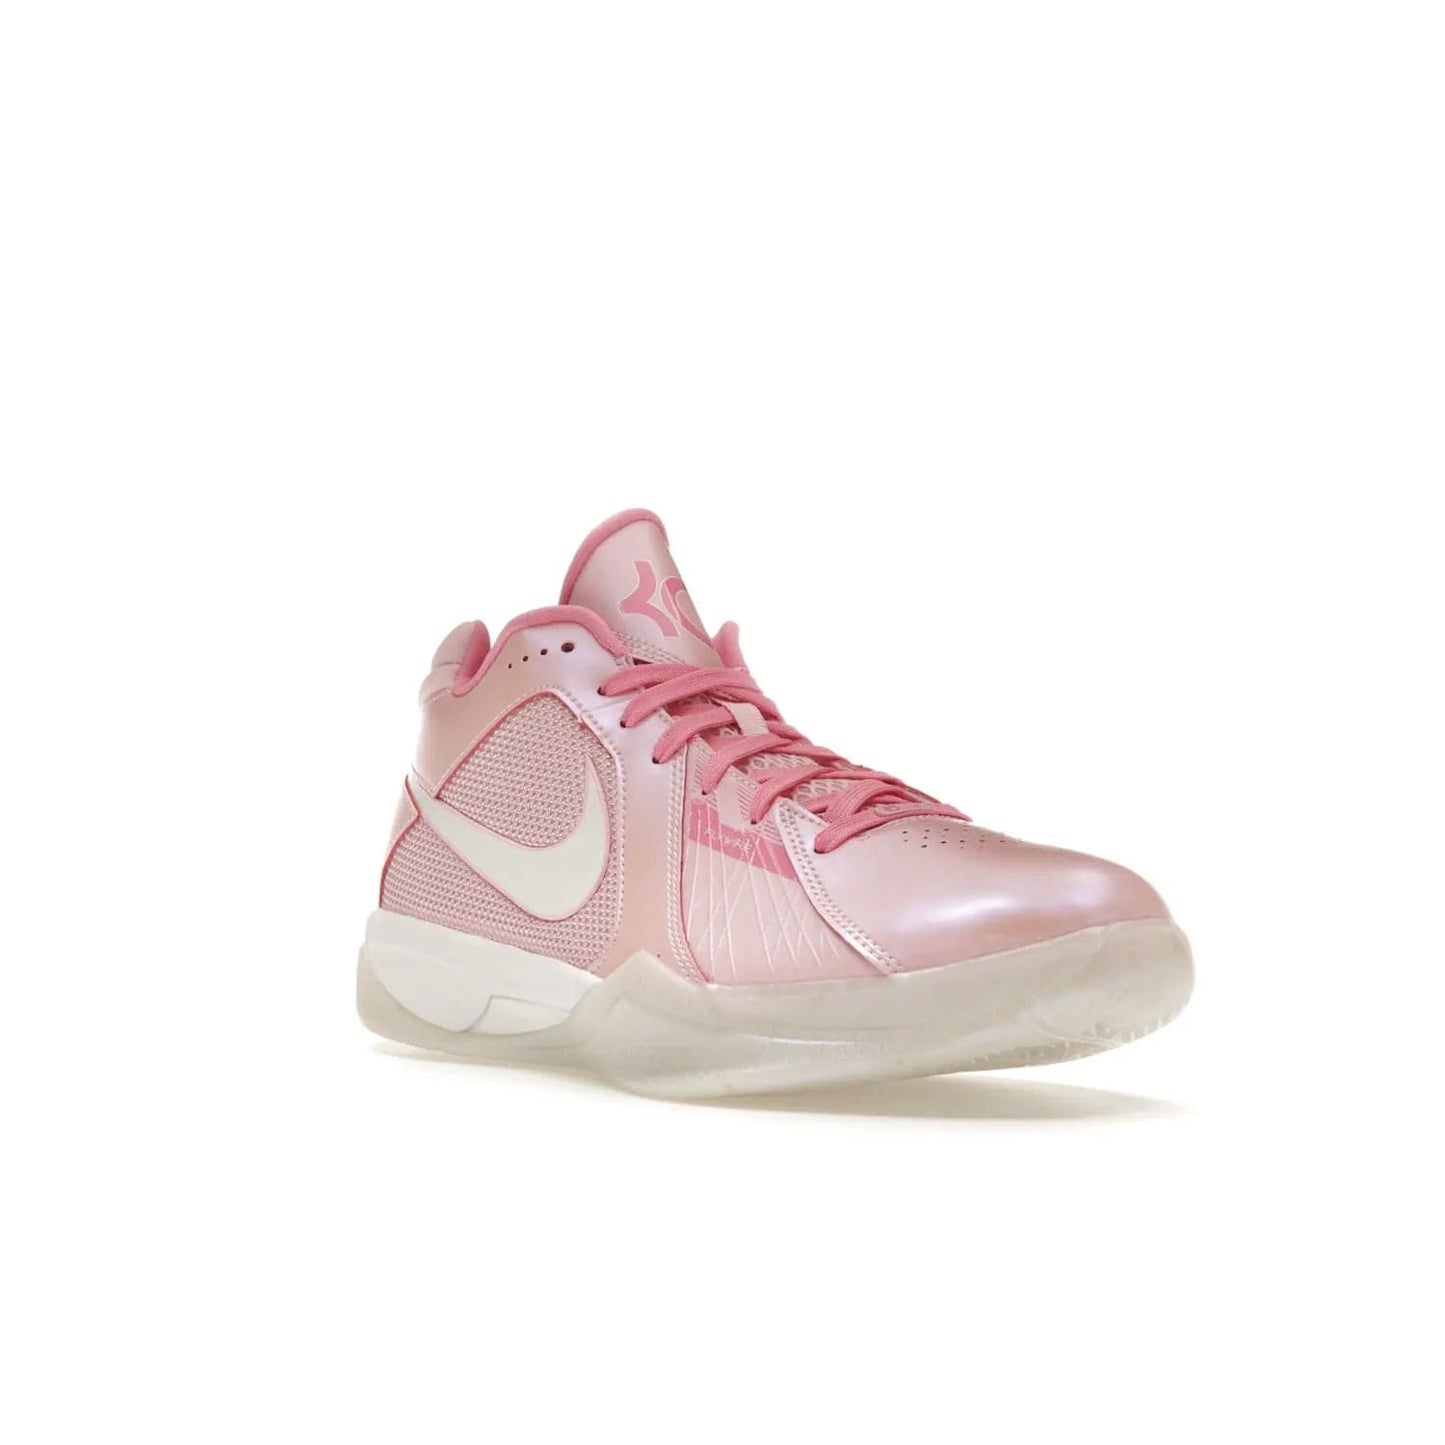 Nike KD 3 Aunt Pearl - Image 6 - Only at www.BallersClubKickz.com - Introducing the Nike KD 3 Aunt Pearl. Featuring a bold Medium Soft Pink, White, & Lotus Pink colorway. Get ready to stand out this October 15th.